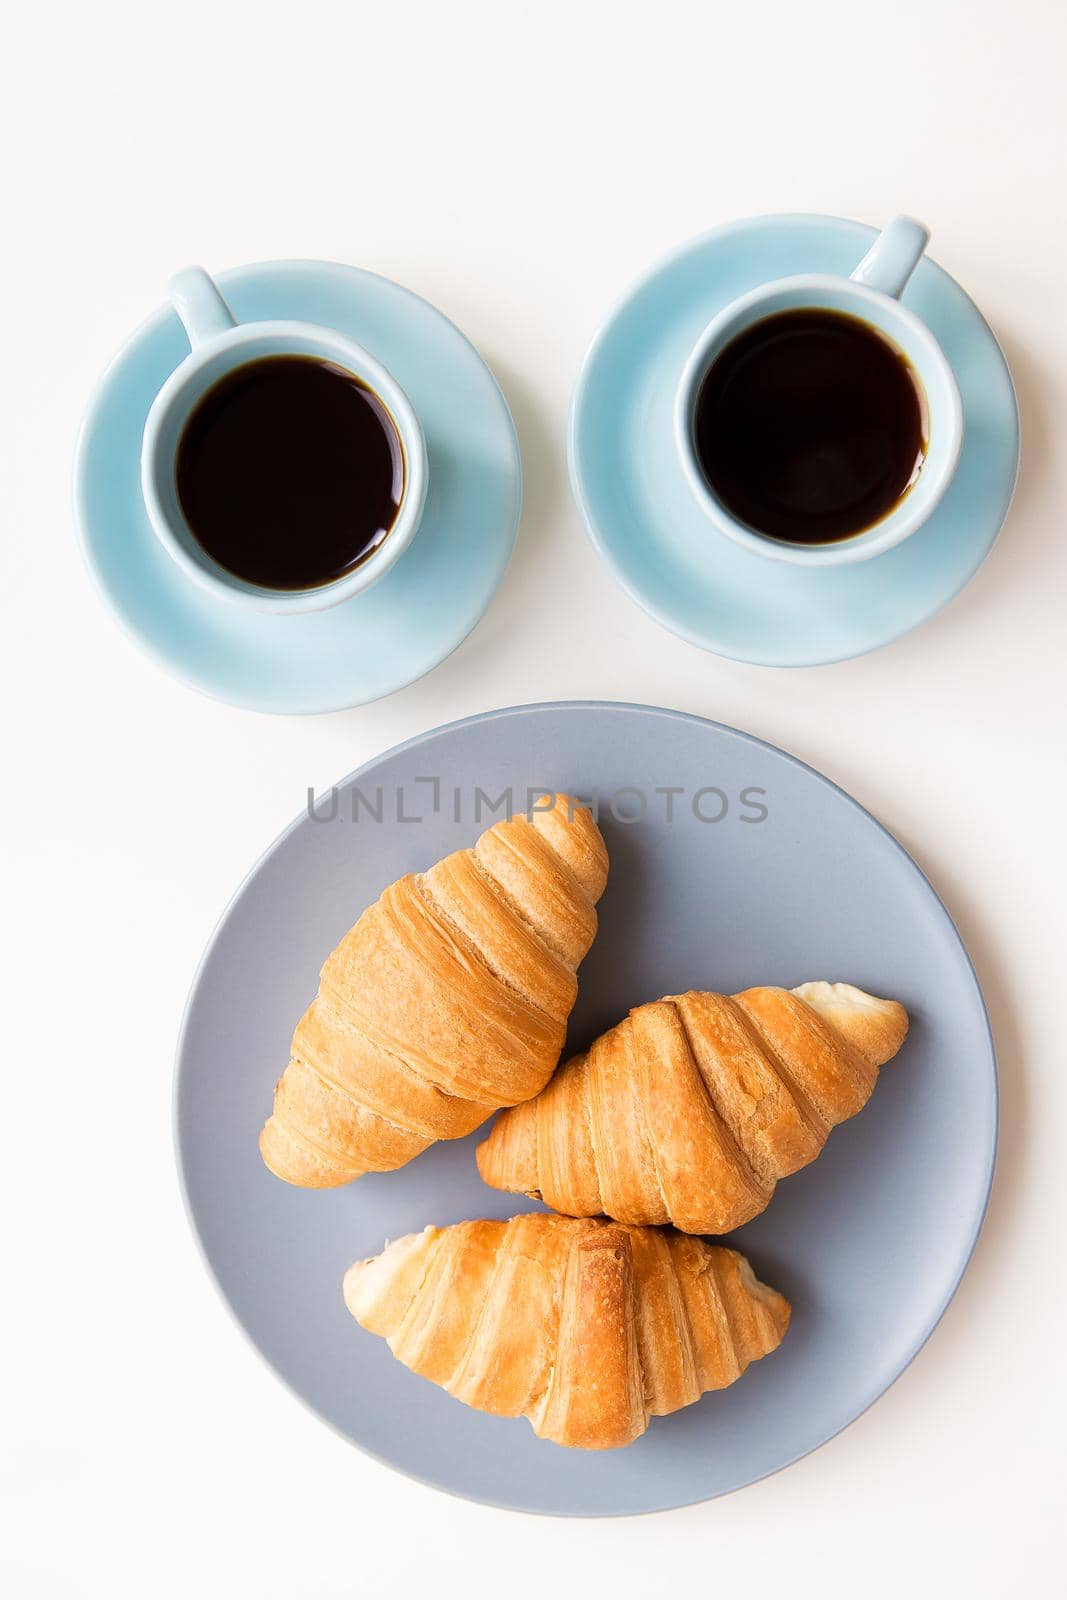 cup of coffee with croissant on white background.